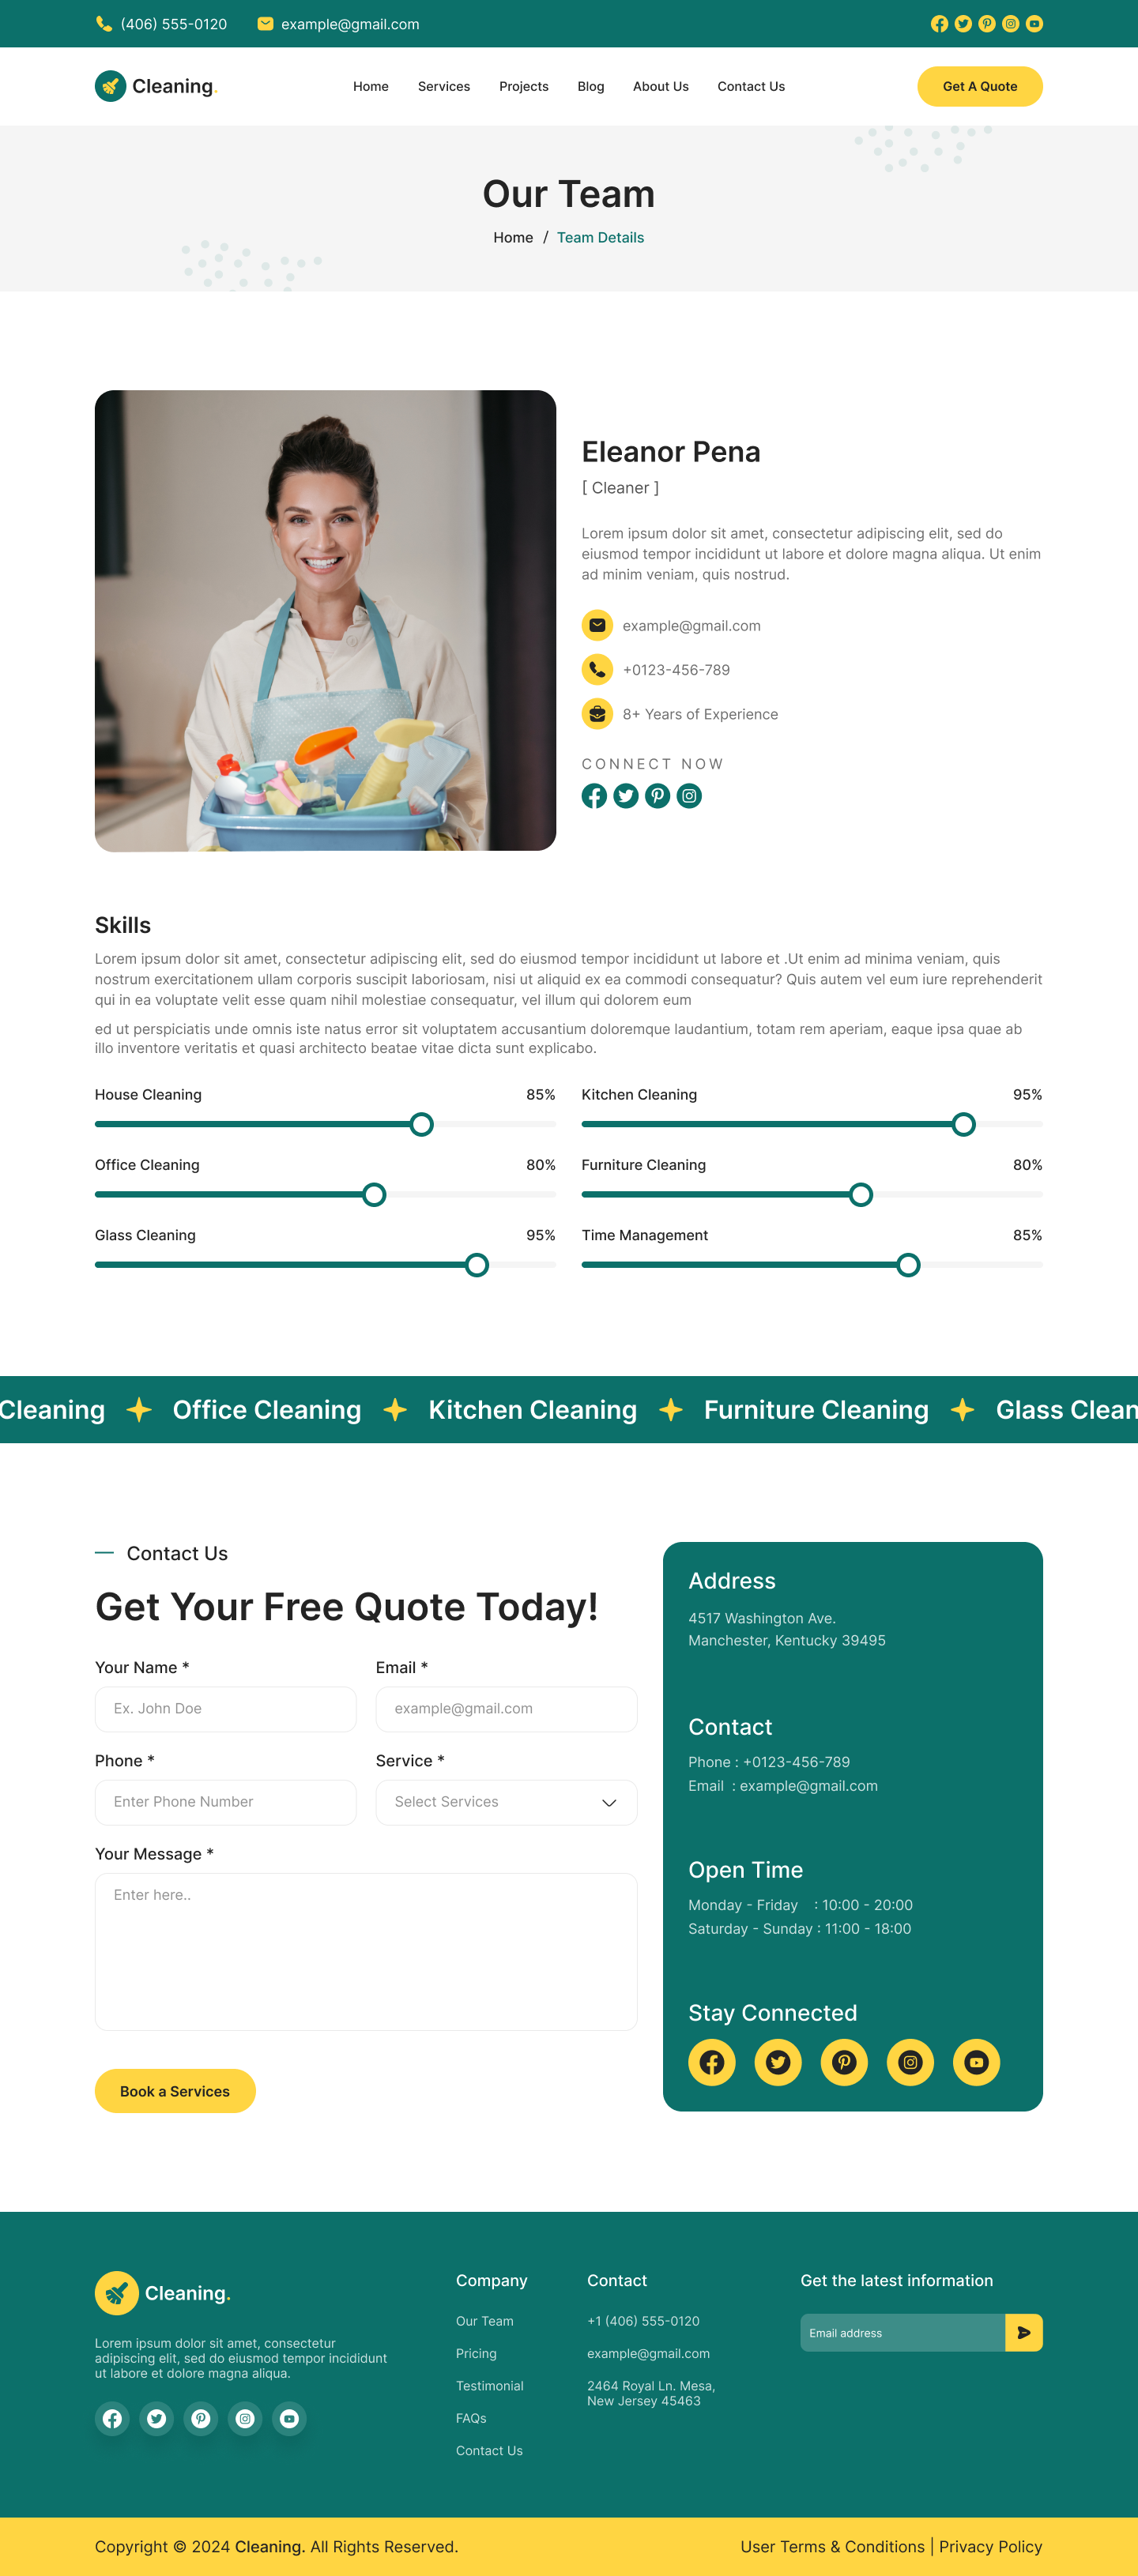 cleaning service website Team Details Page figma design